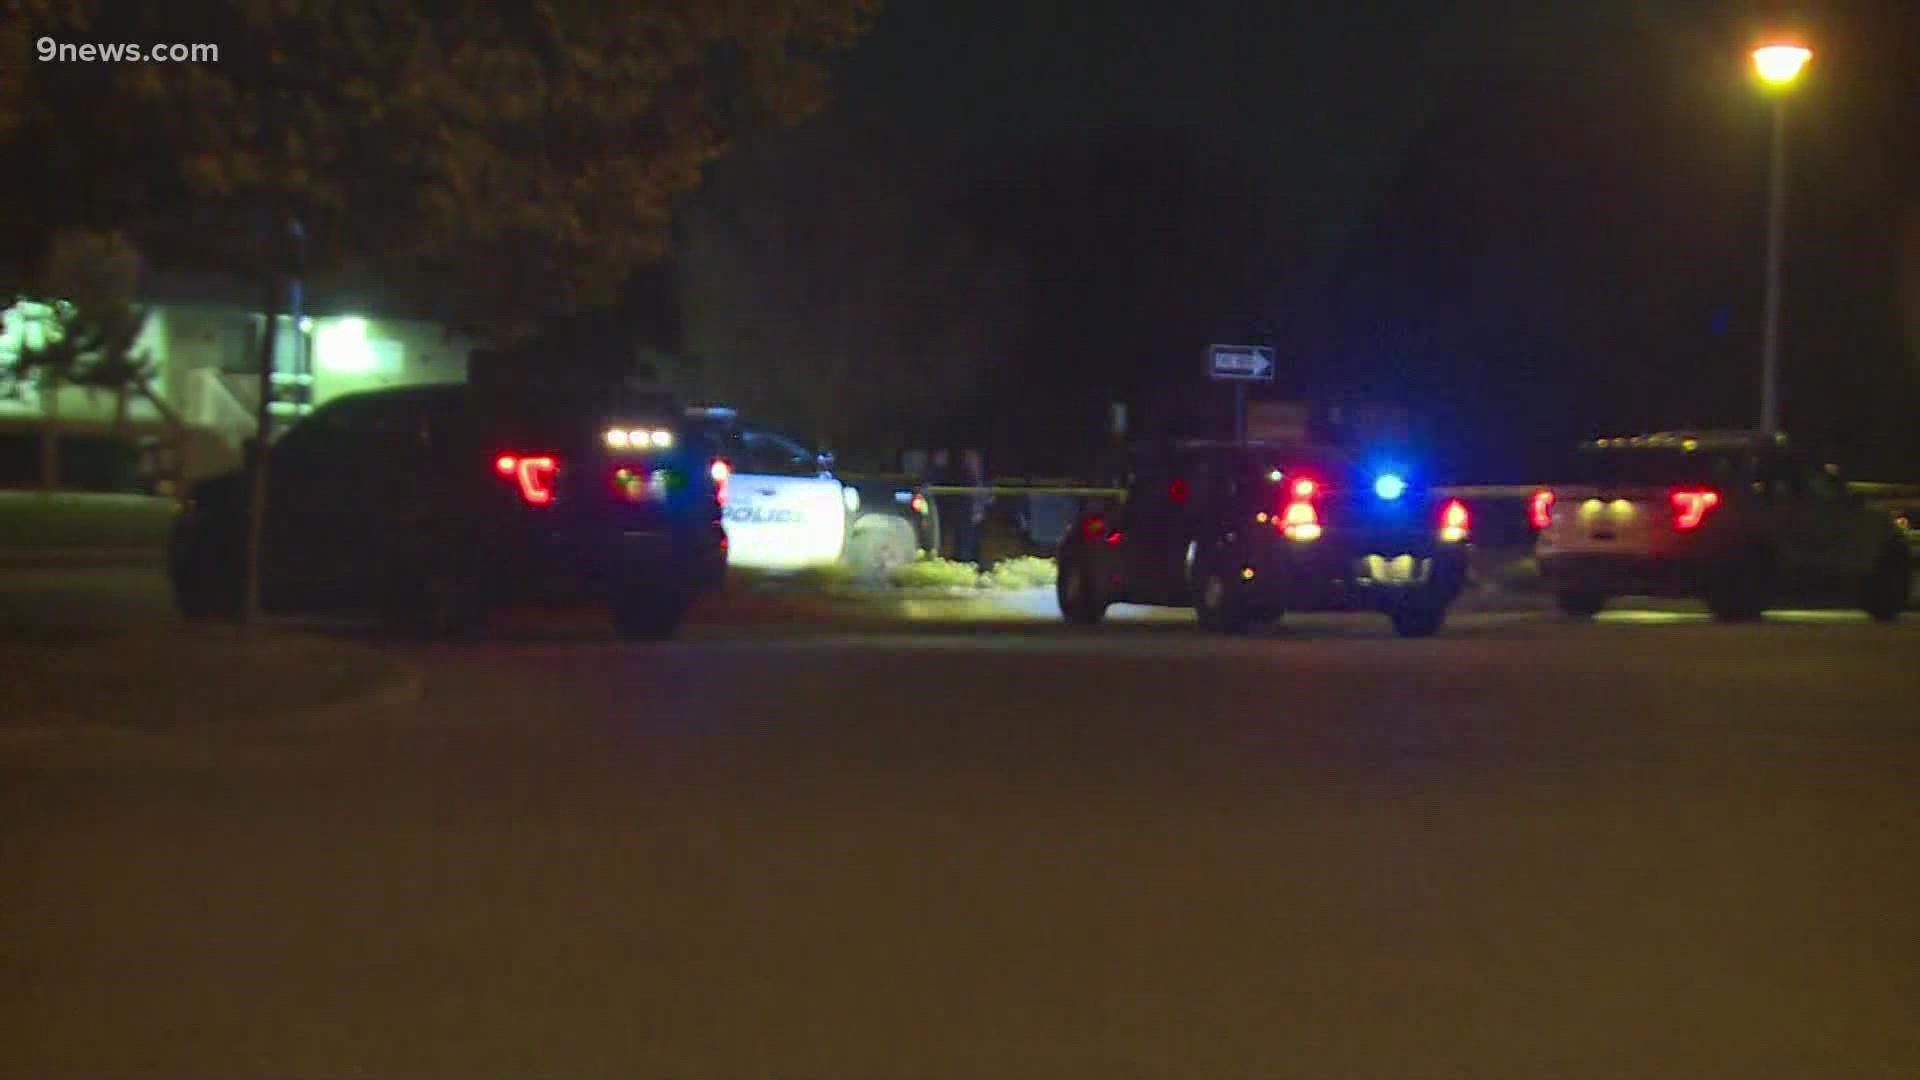 A 14-year-old boy was hit and killed by a van driven by a 15-year-old girl in an Aurora rec center parking lot Monday night, according to police.